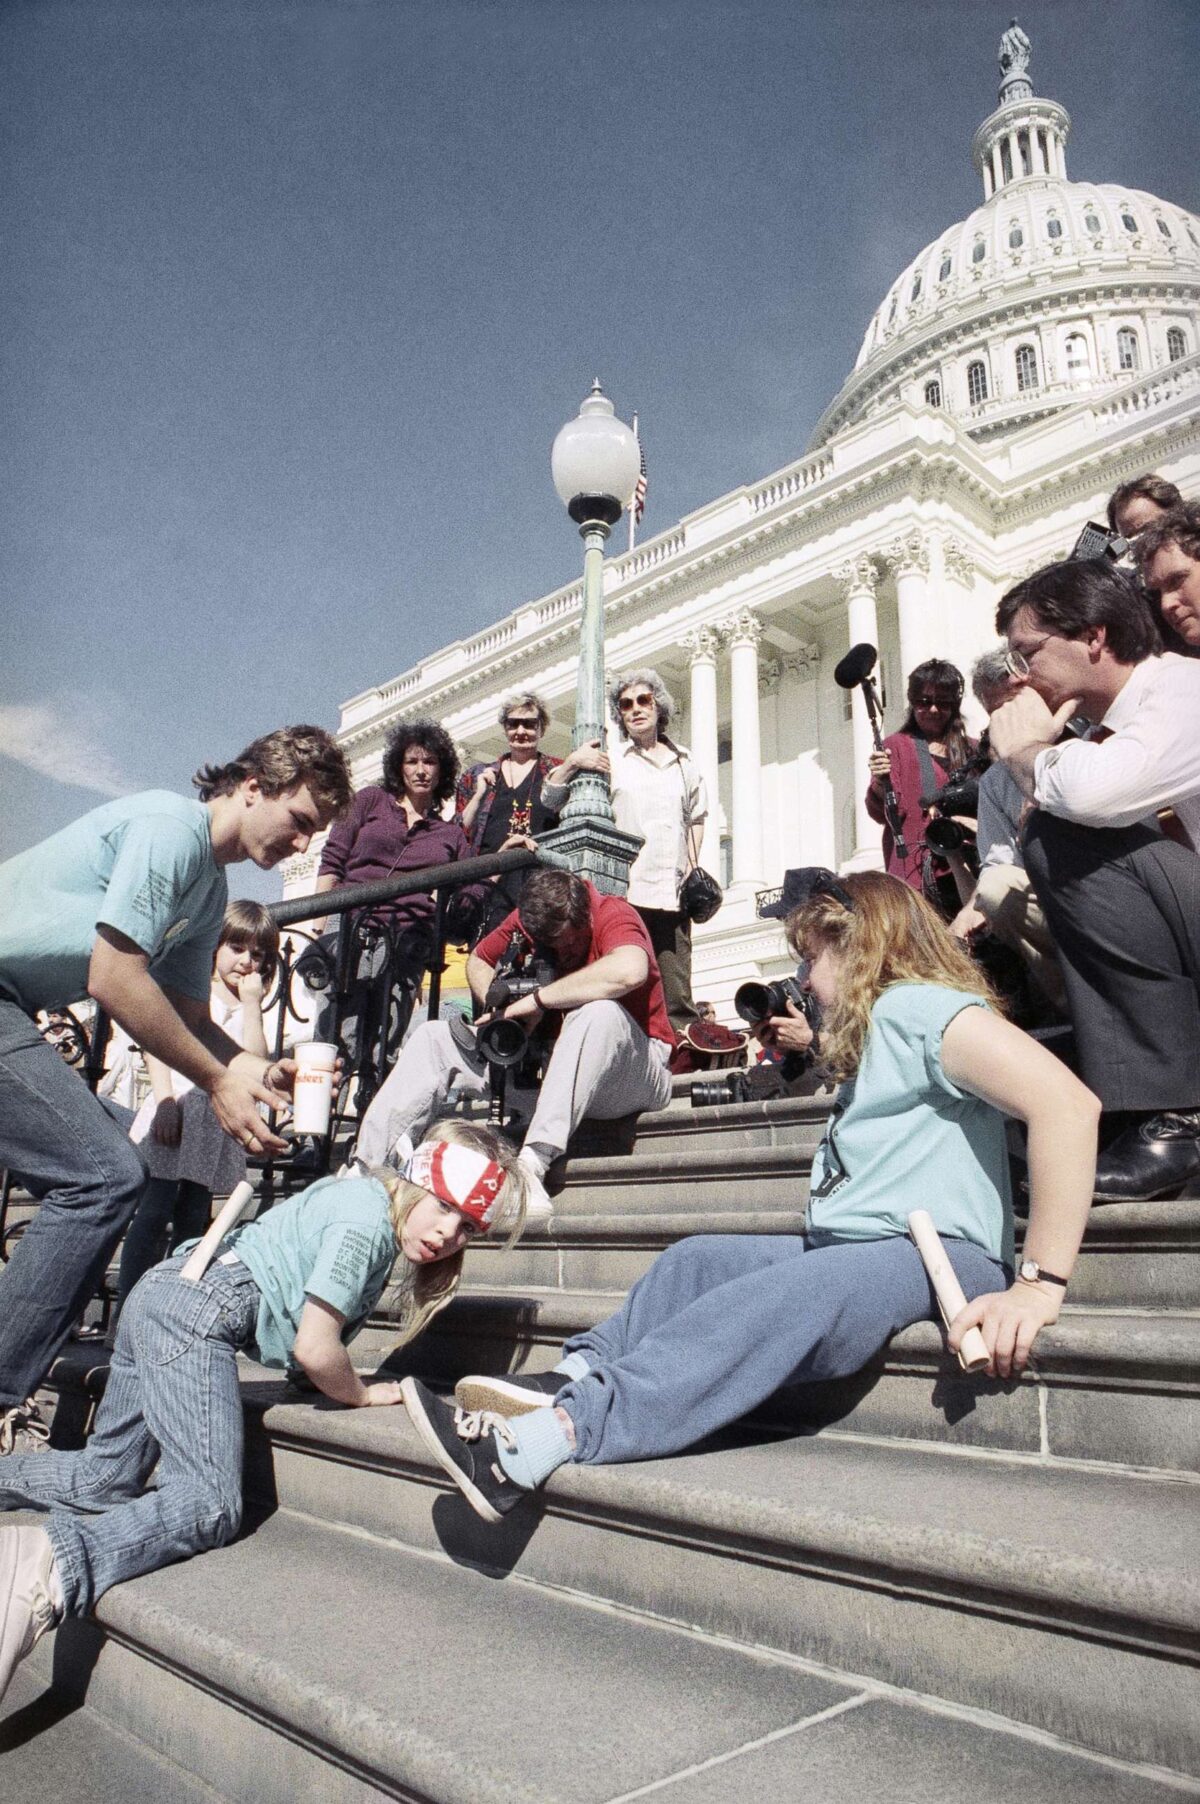 A group of people with disabilities pull themselves up the steps of the United States Capitol Building.